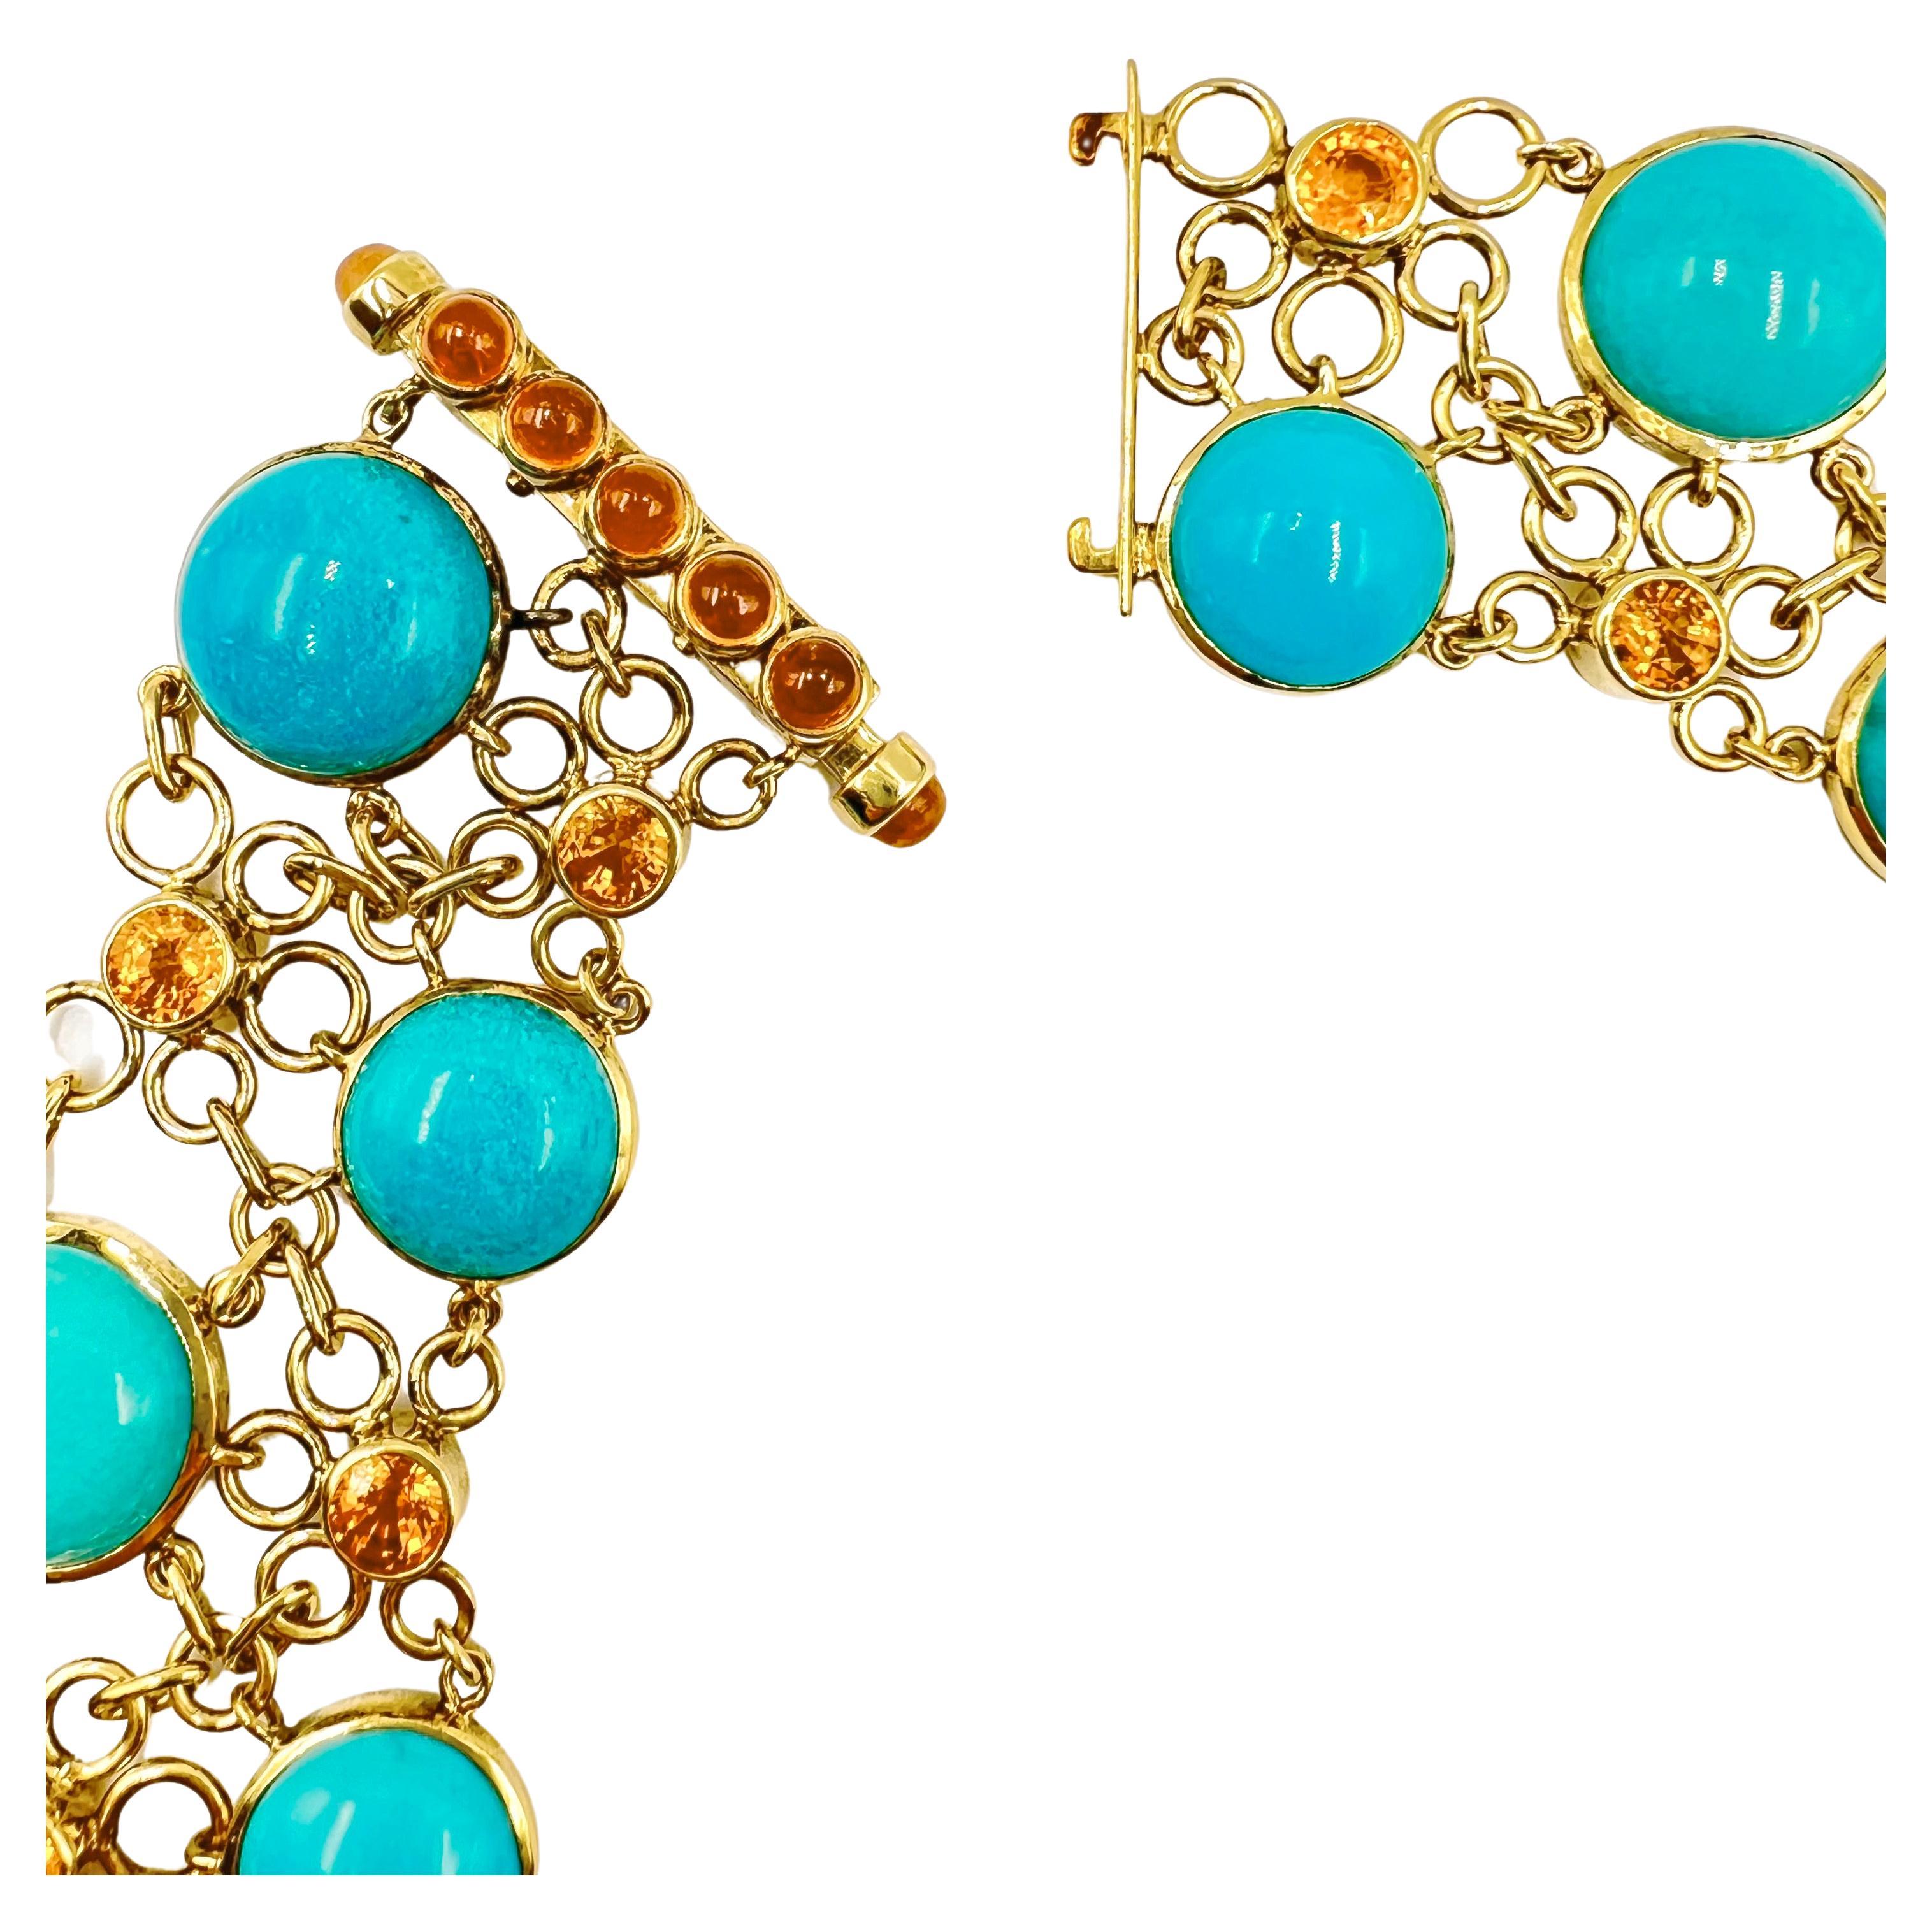 Interlocking polished 18k yellow gold circular links set with turquoise and citrine by Florida designer Laura Munder. Twenty-four round, cabochon cut, natural turquoise 13-15mm each. Accented by twenty-four 5mm round, mixed cut, natural citrine